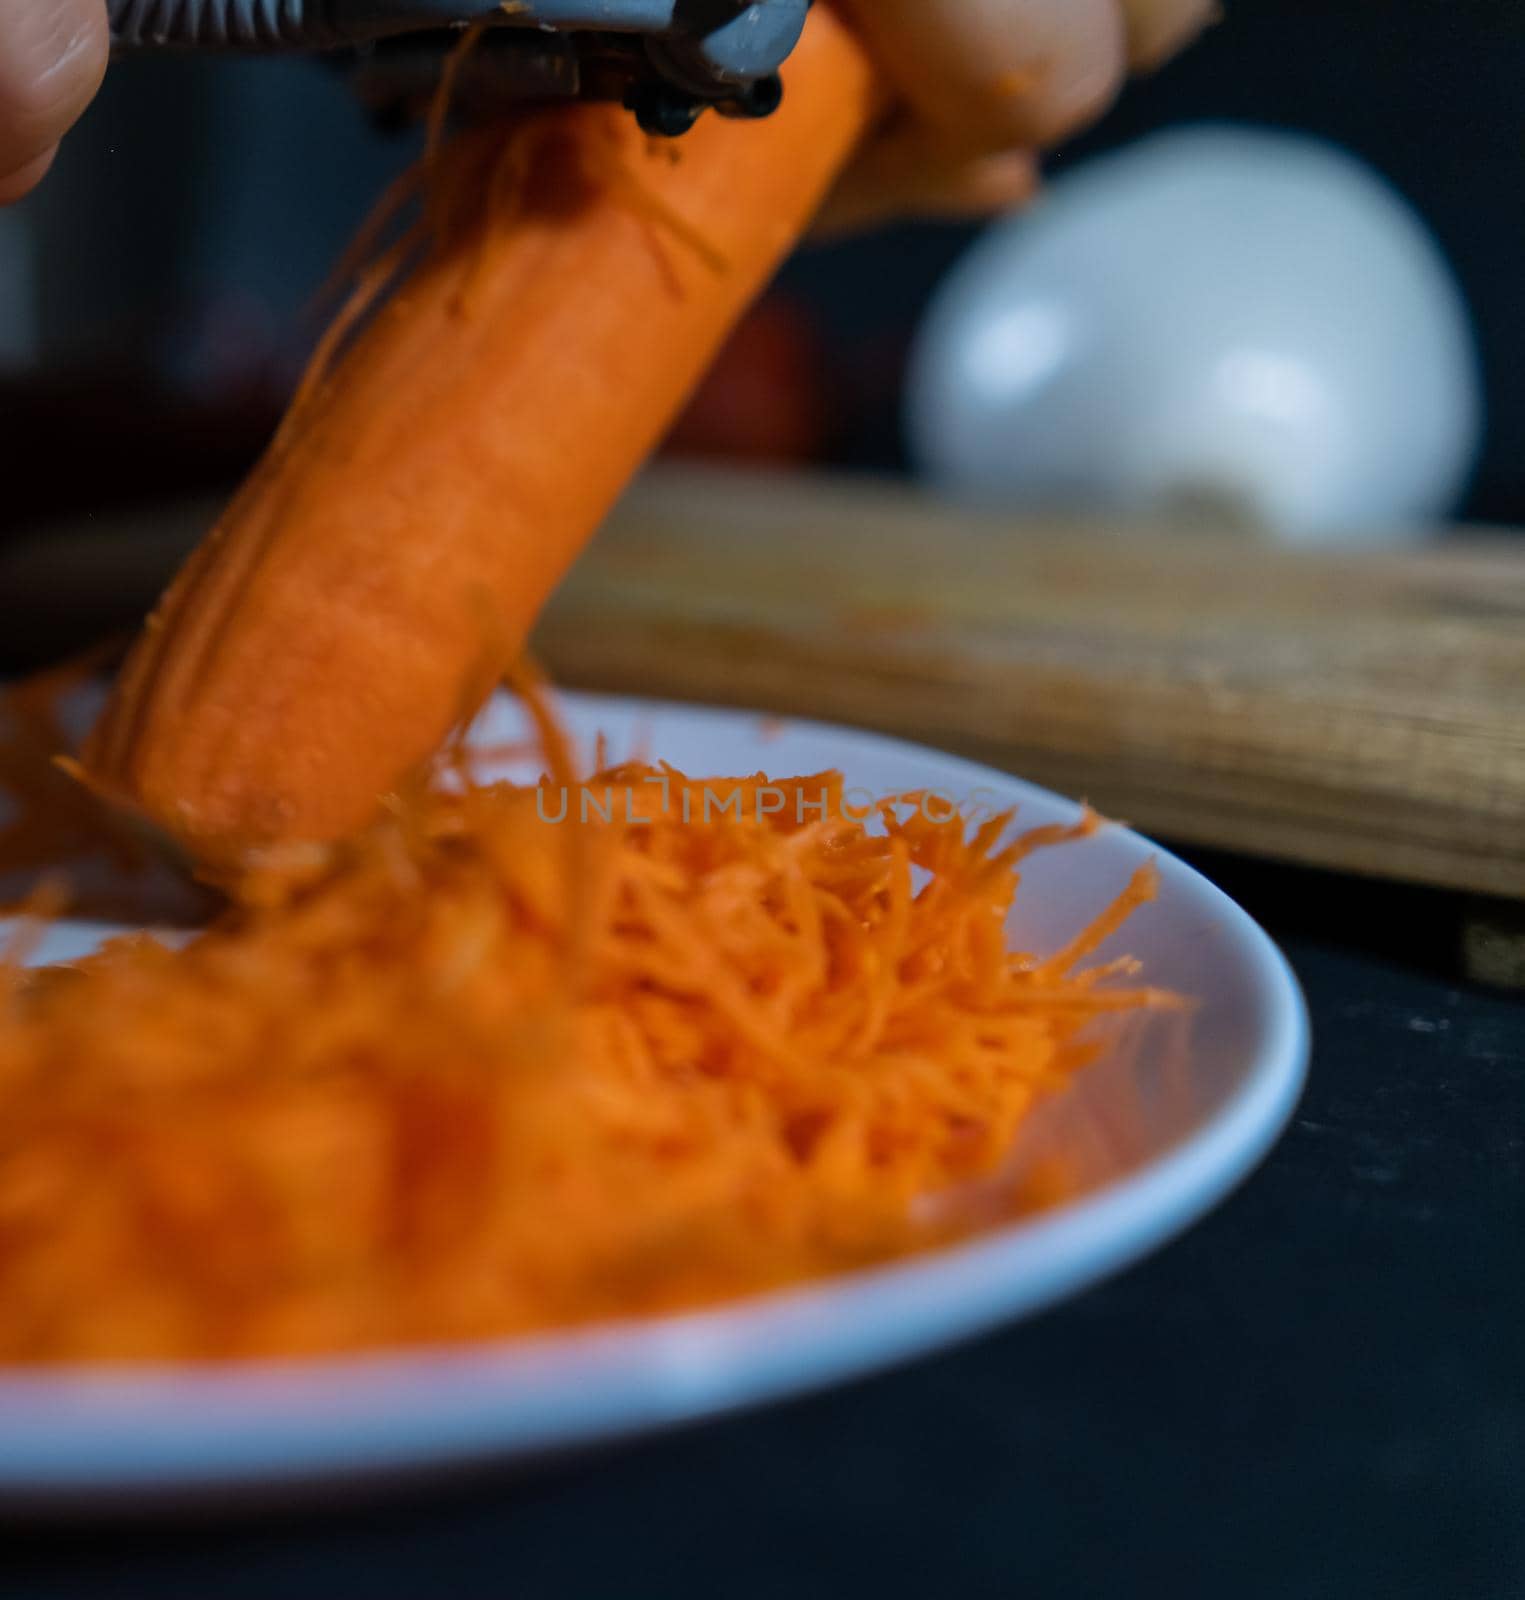 Close-up of hands peeling carrot with julienne peeler above white plate with blurry vegetables as background. Person making small pile of grated orange vegetables. Healthy food preparation